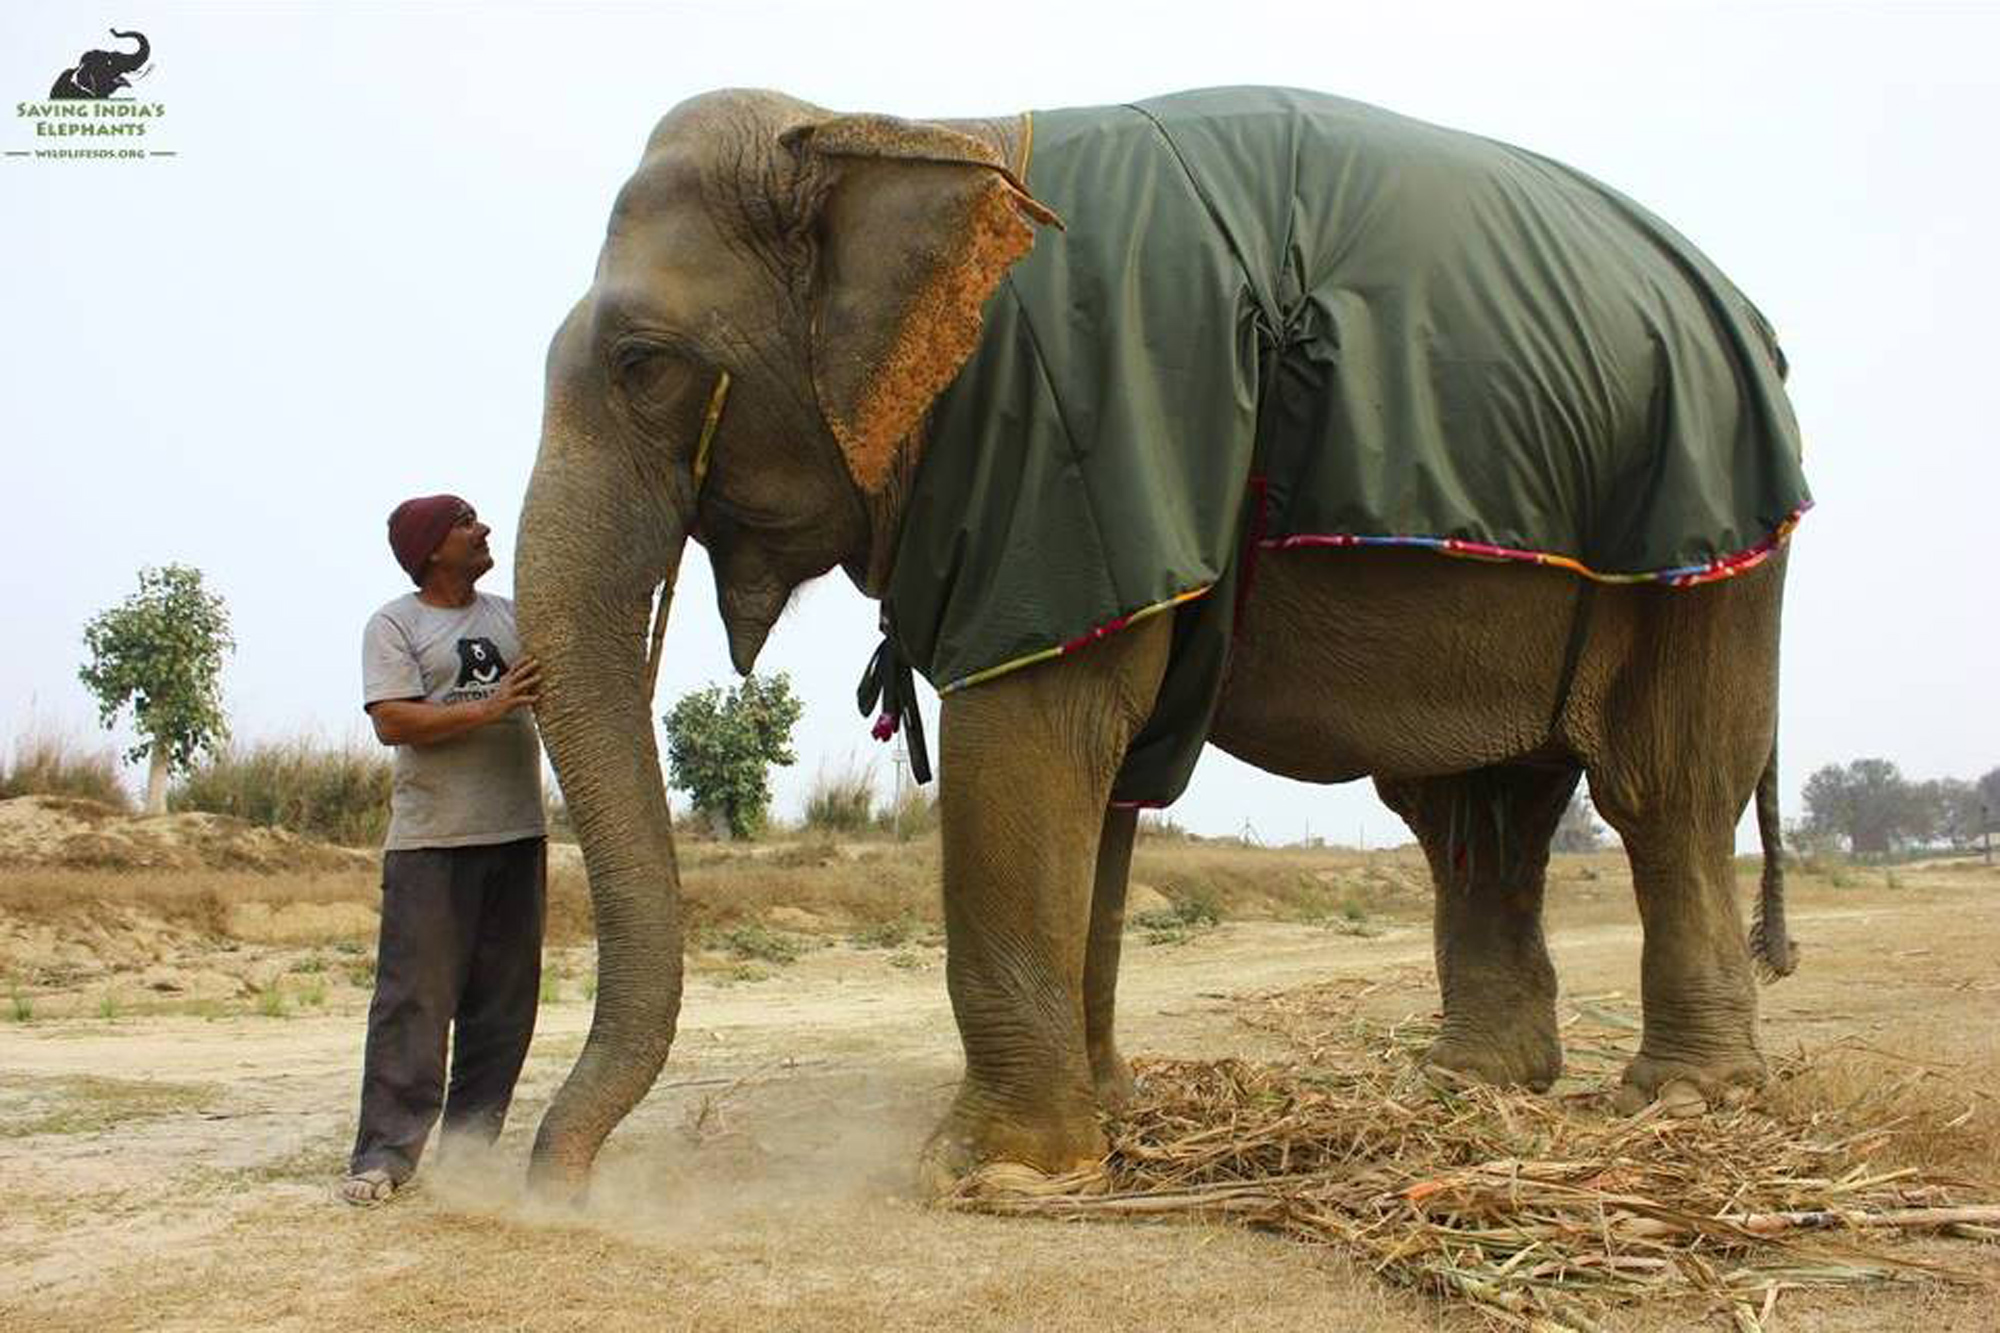 Villagers Knit Sweaters for Rescue Elephants in India | PEOPLE.com